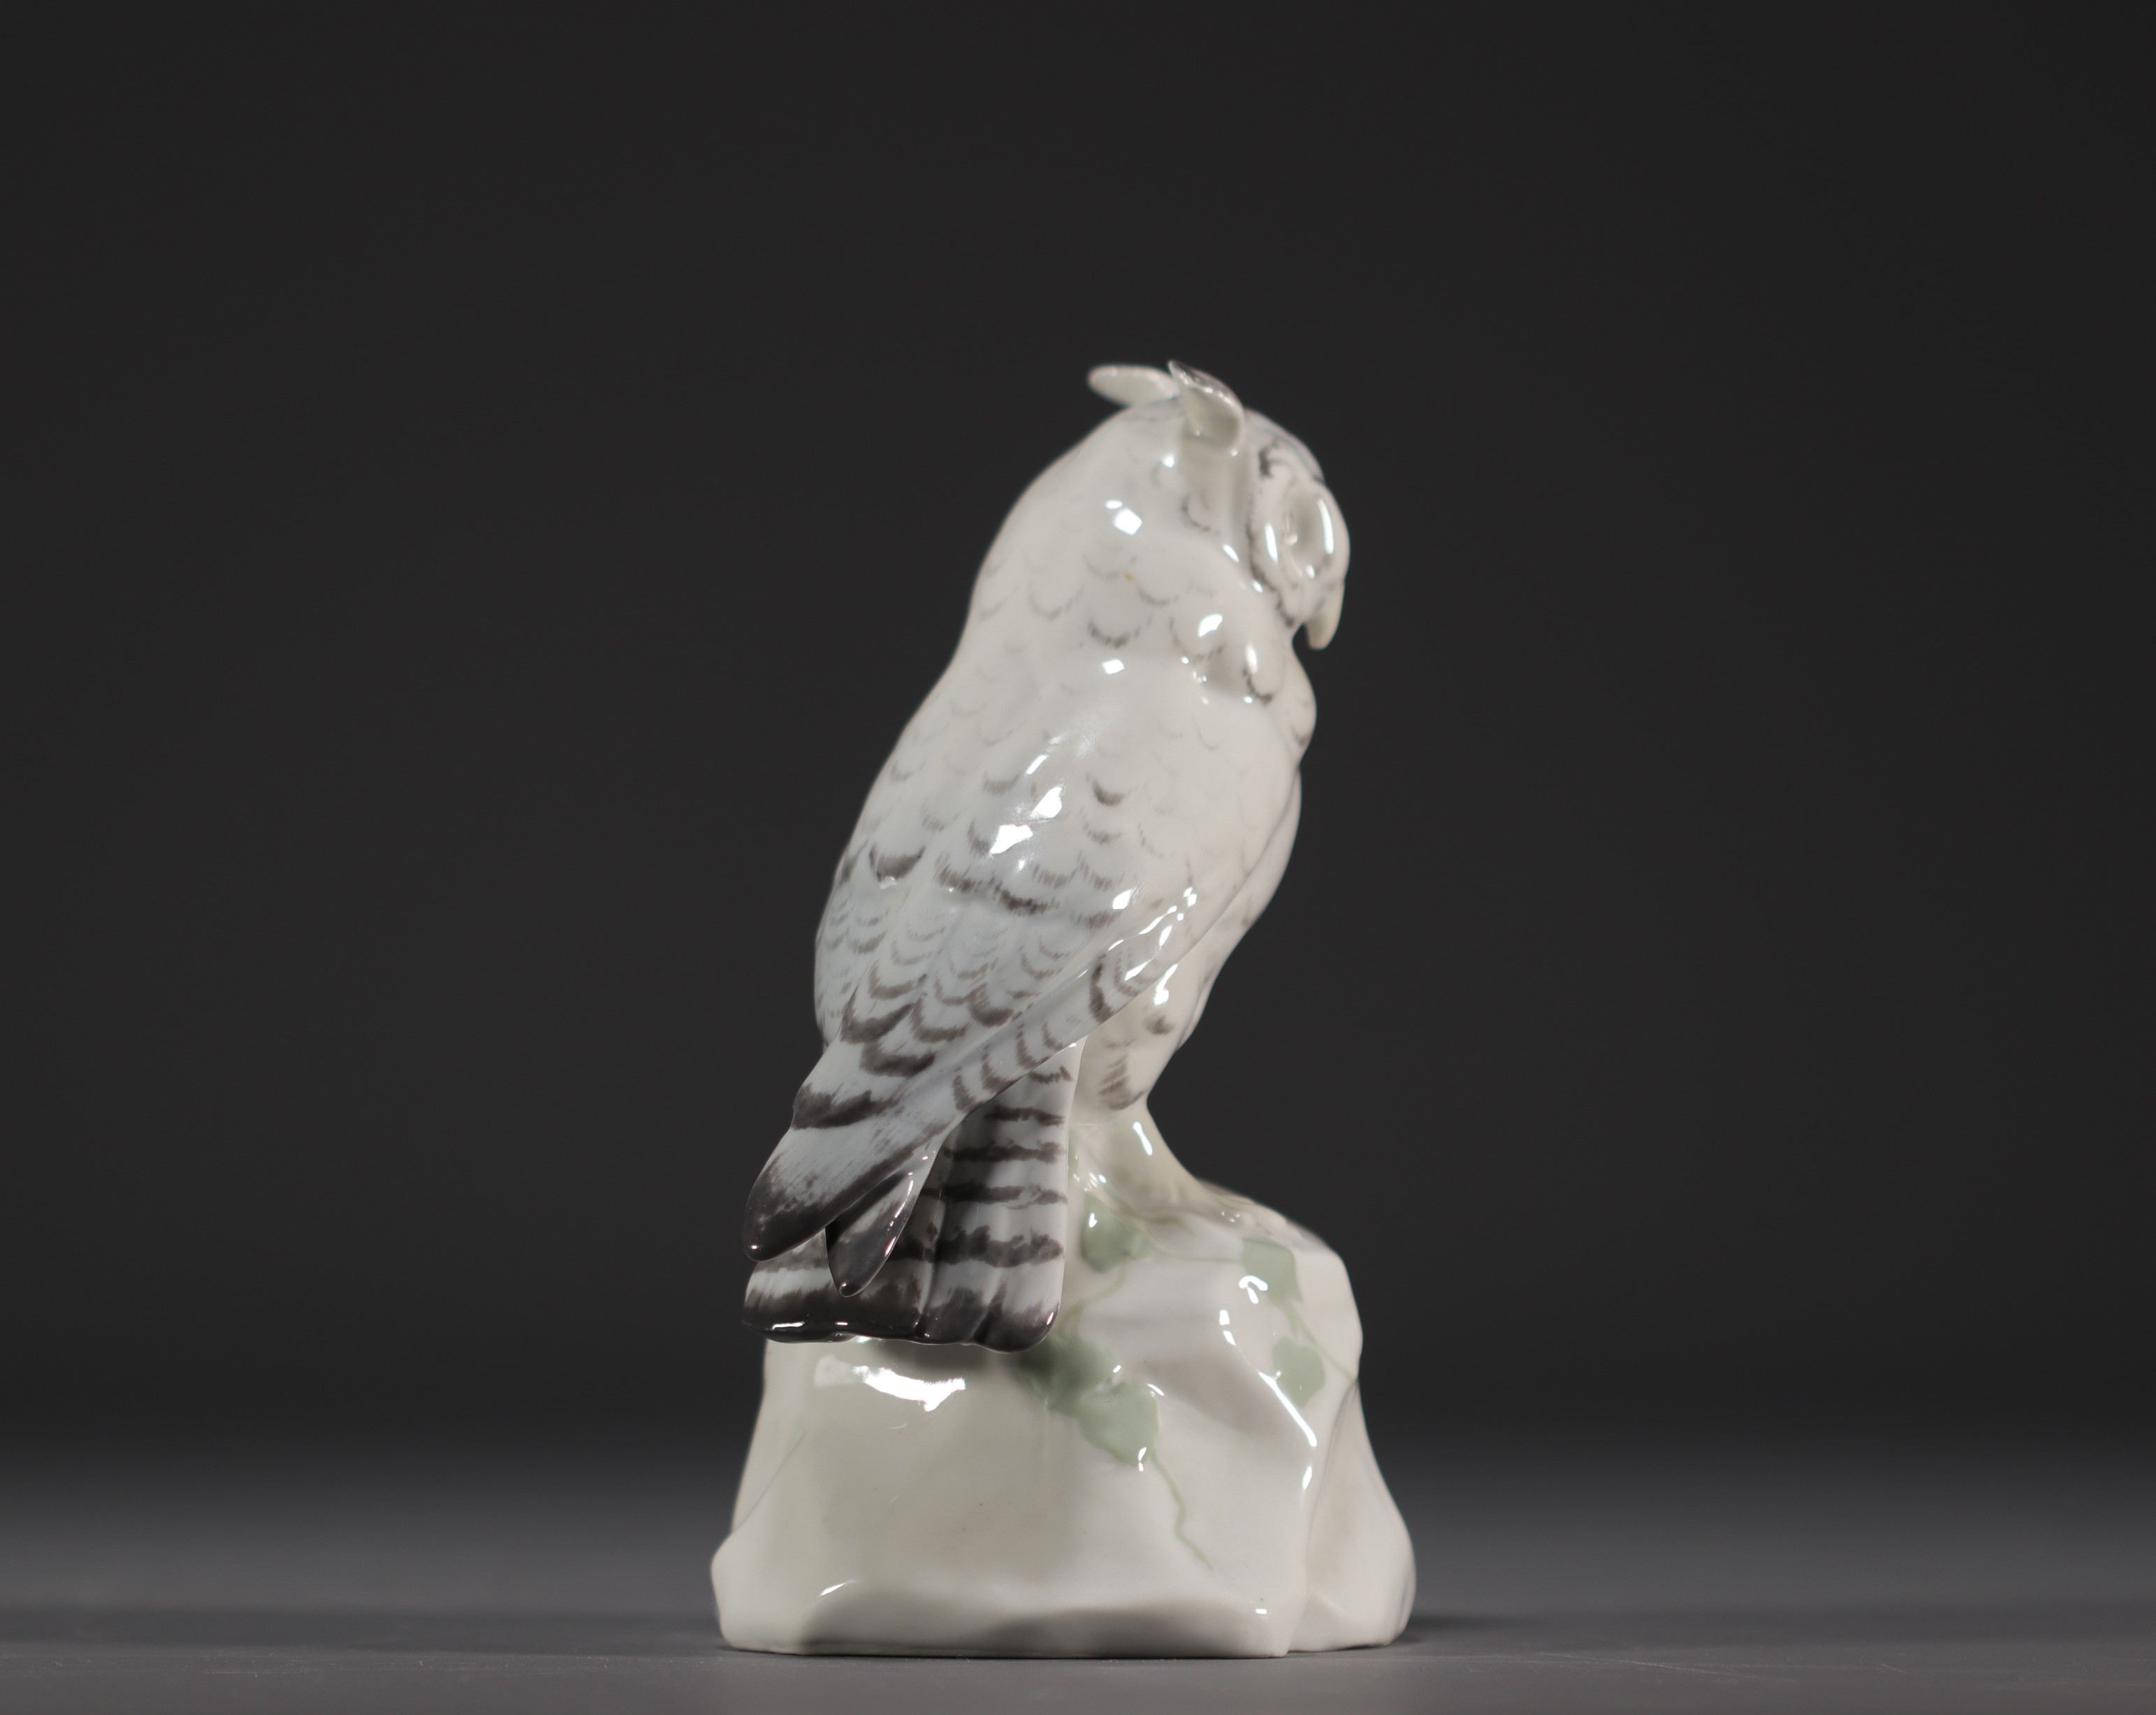 "Grand-duc a l'affut" (Great horned owl on the prowl) Porcelain statuette, debossed mark under the p - Image 3 of 4